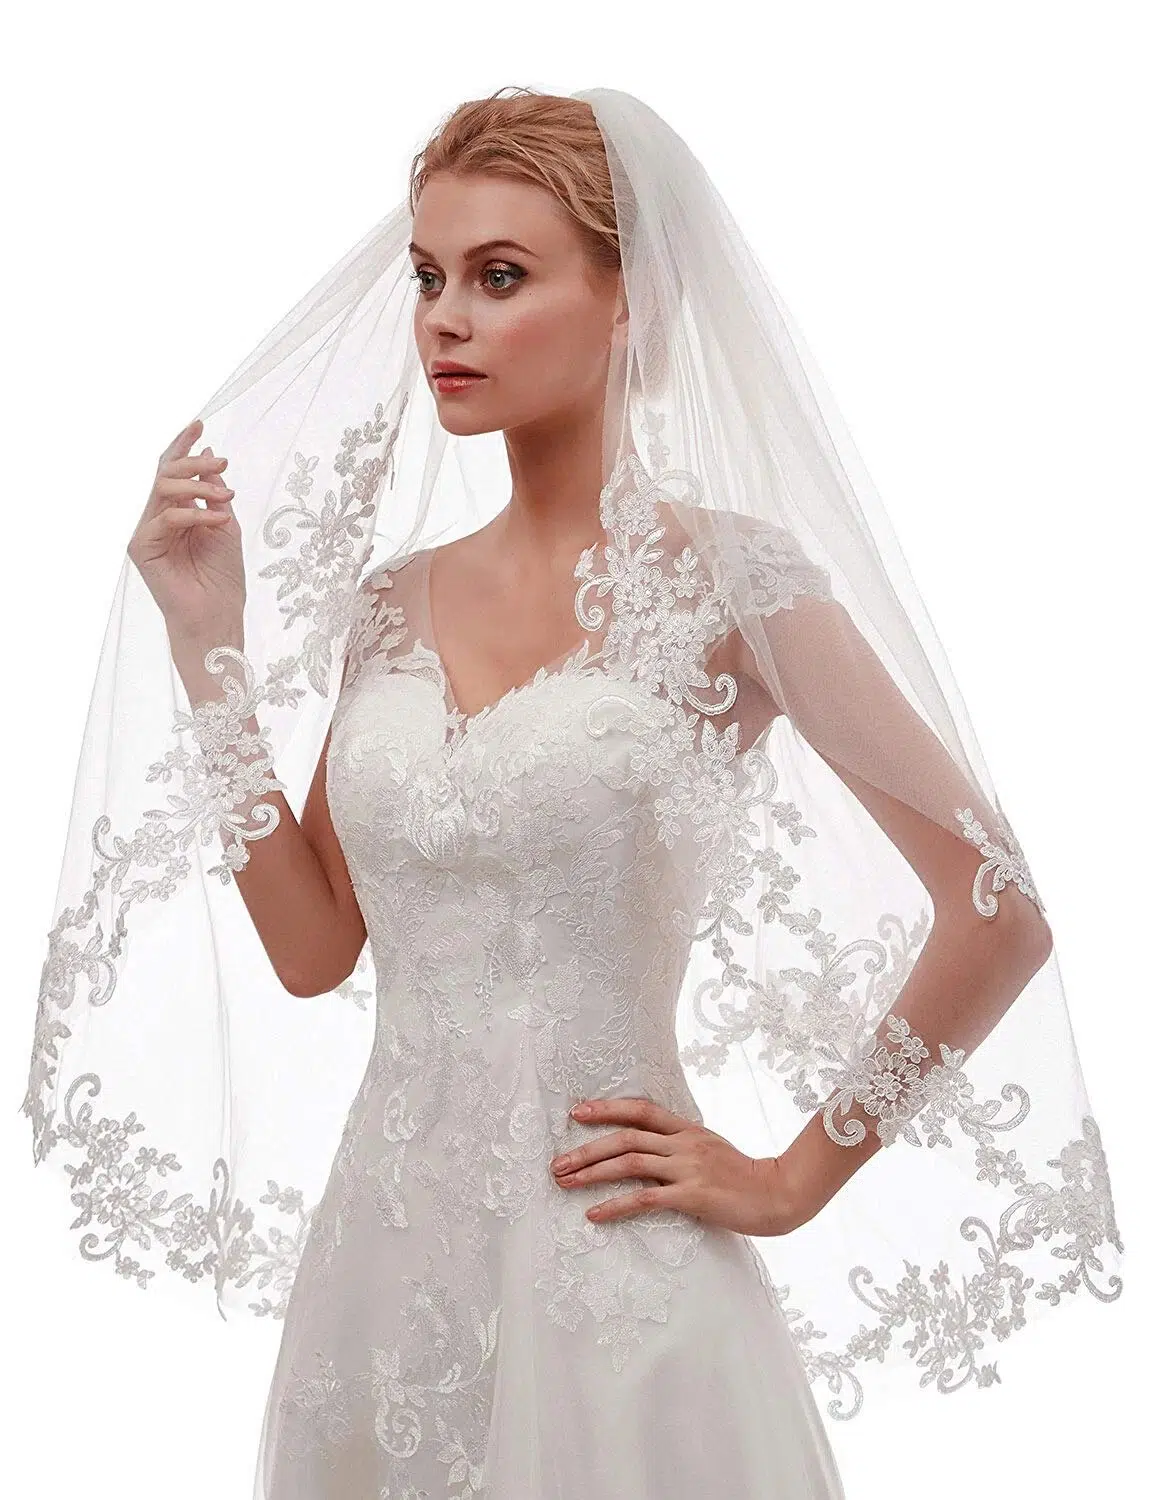 2-Tier-Lace-Wedding-Bridal-Veil-With-Comb-ivory-veil